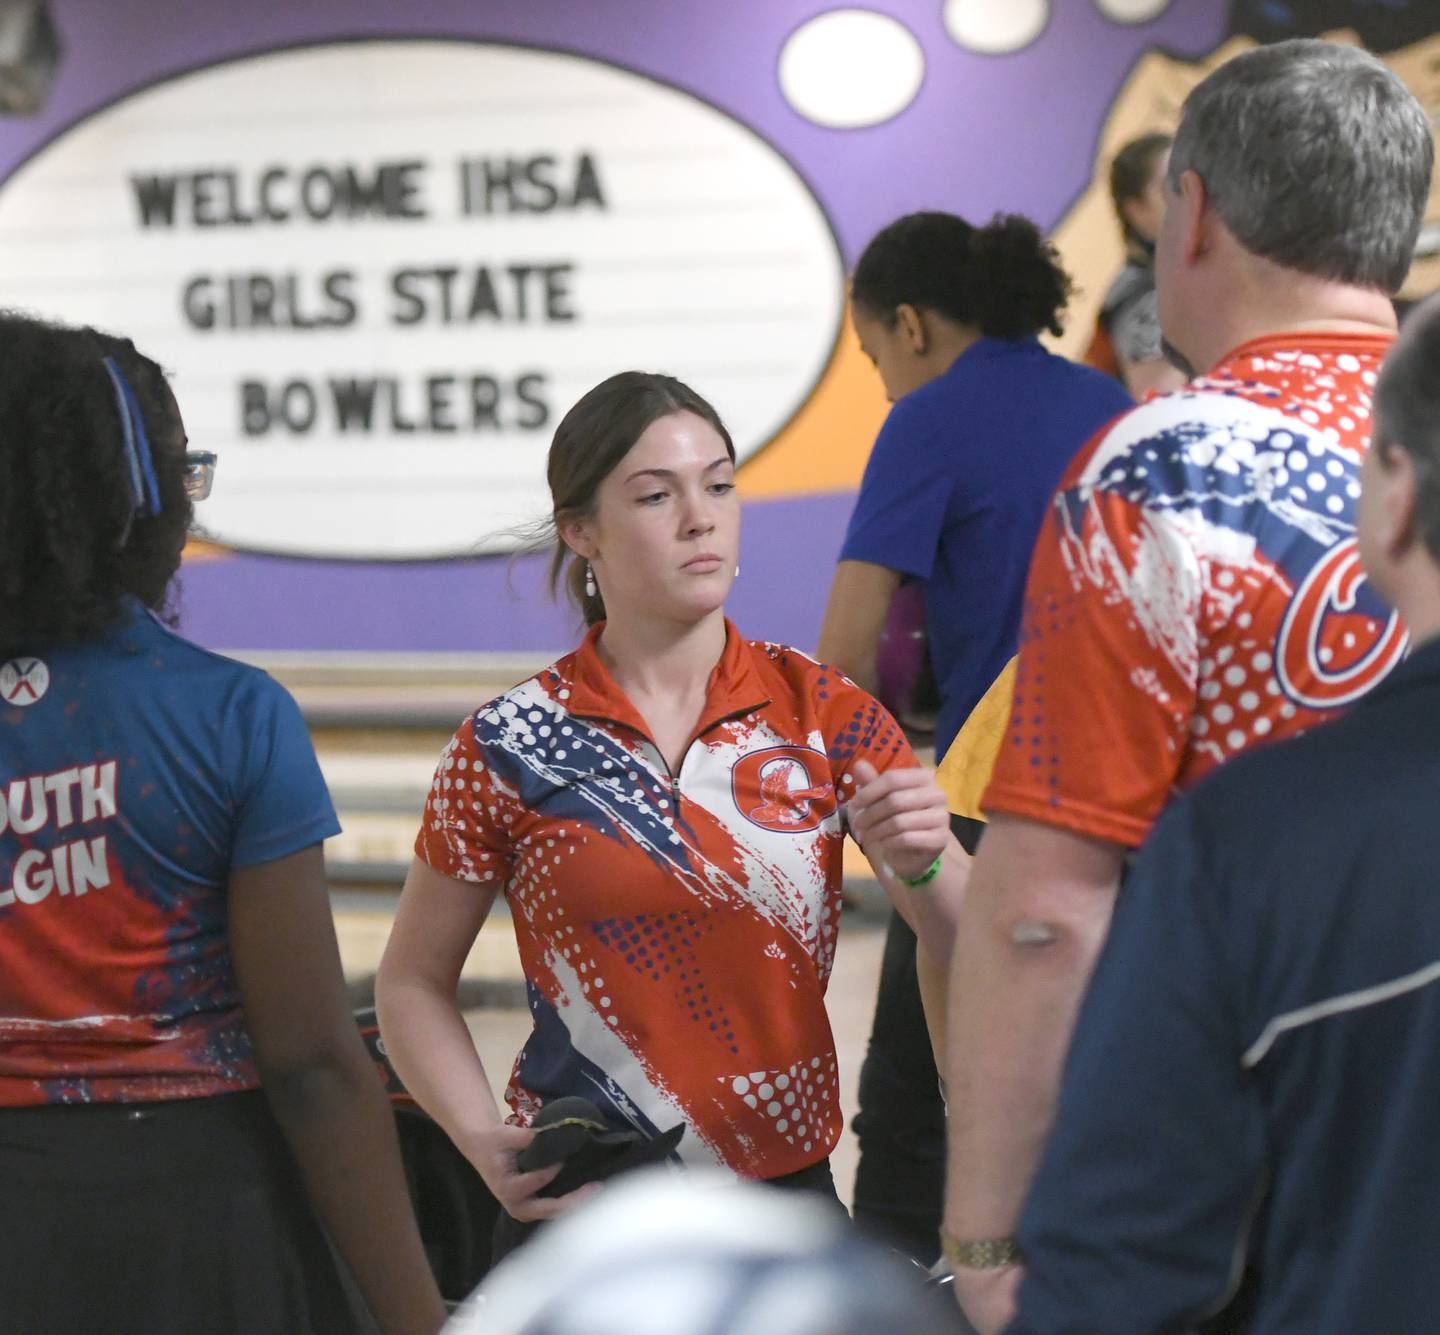 Oregon's Av Wight walks back to her coach Al Nordman during the finals of the girls state tournament held at Cherry Bowl in Cherry Valley on Saturday.